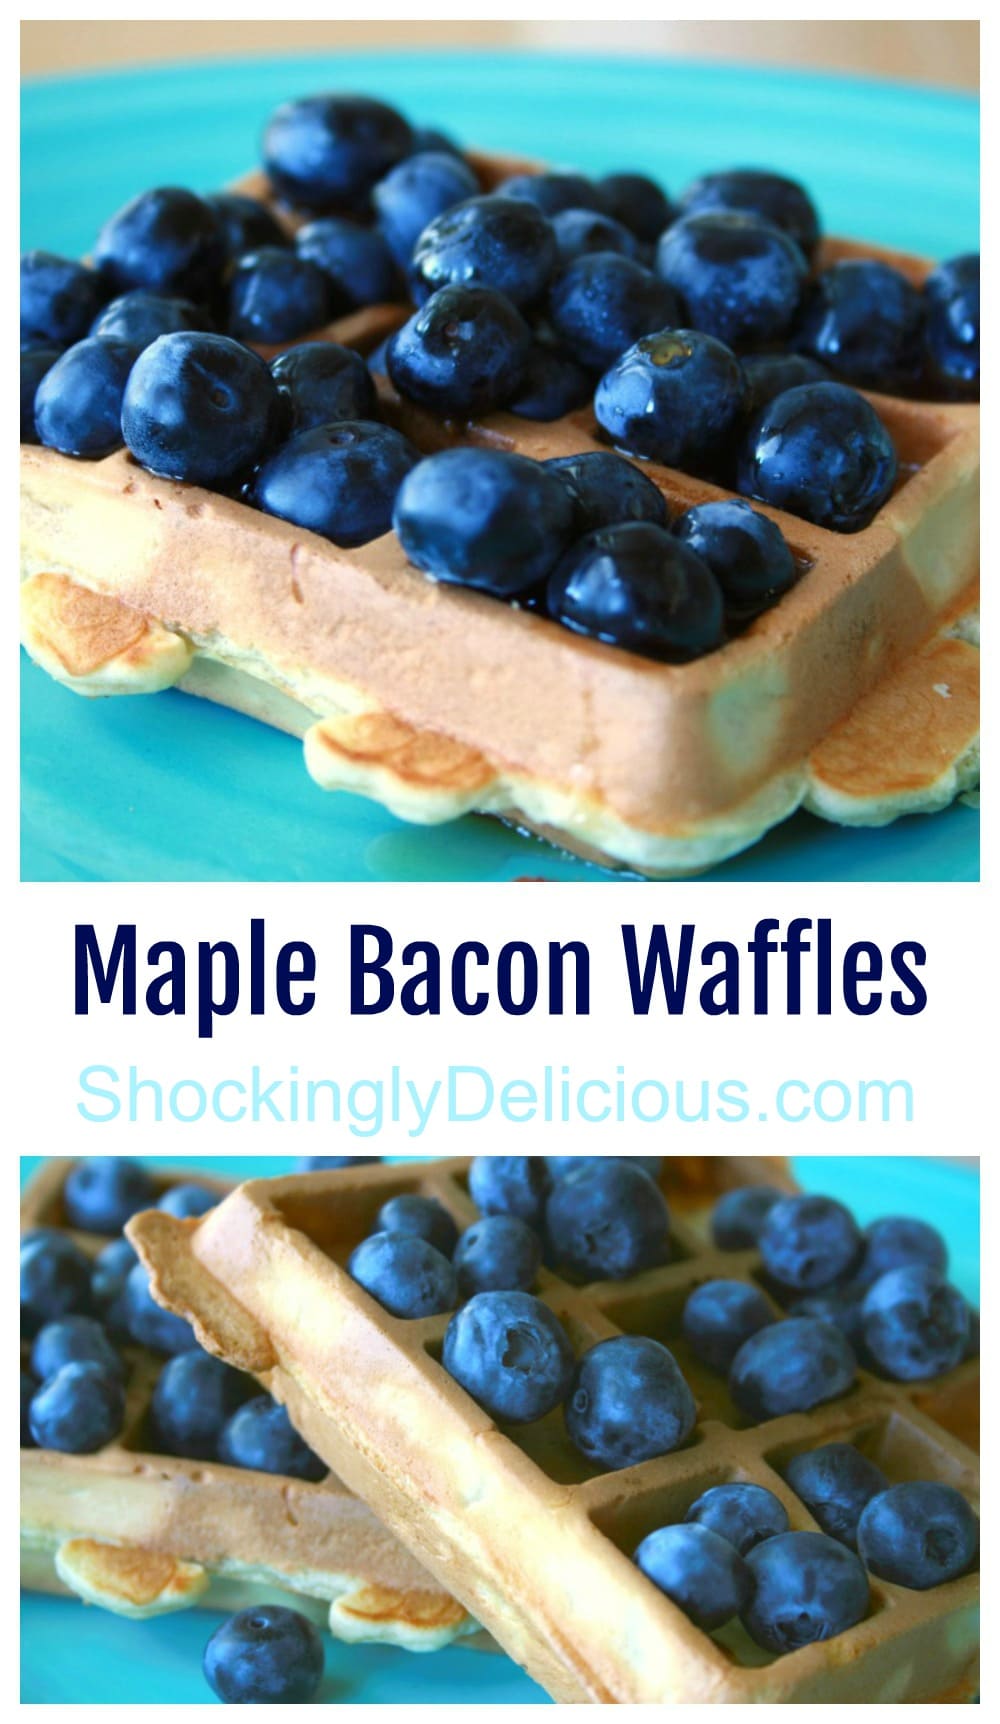 Maple Bacon Waffles with blueberries on top on a turquoise plate 